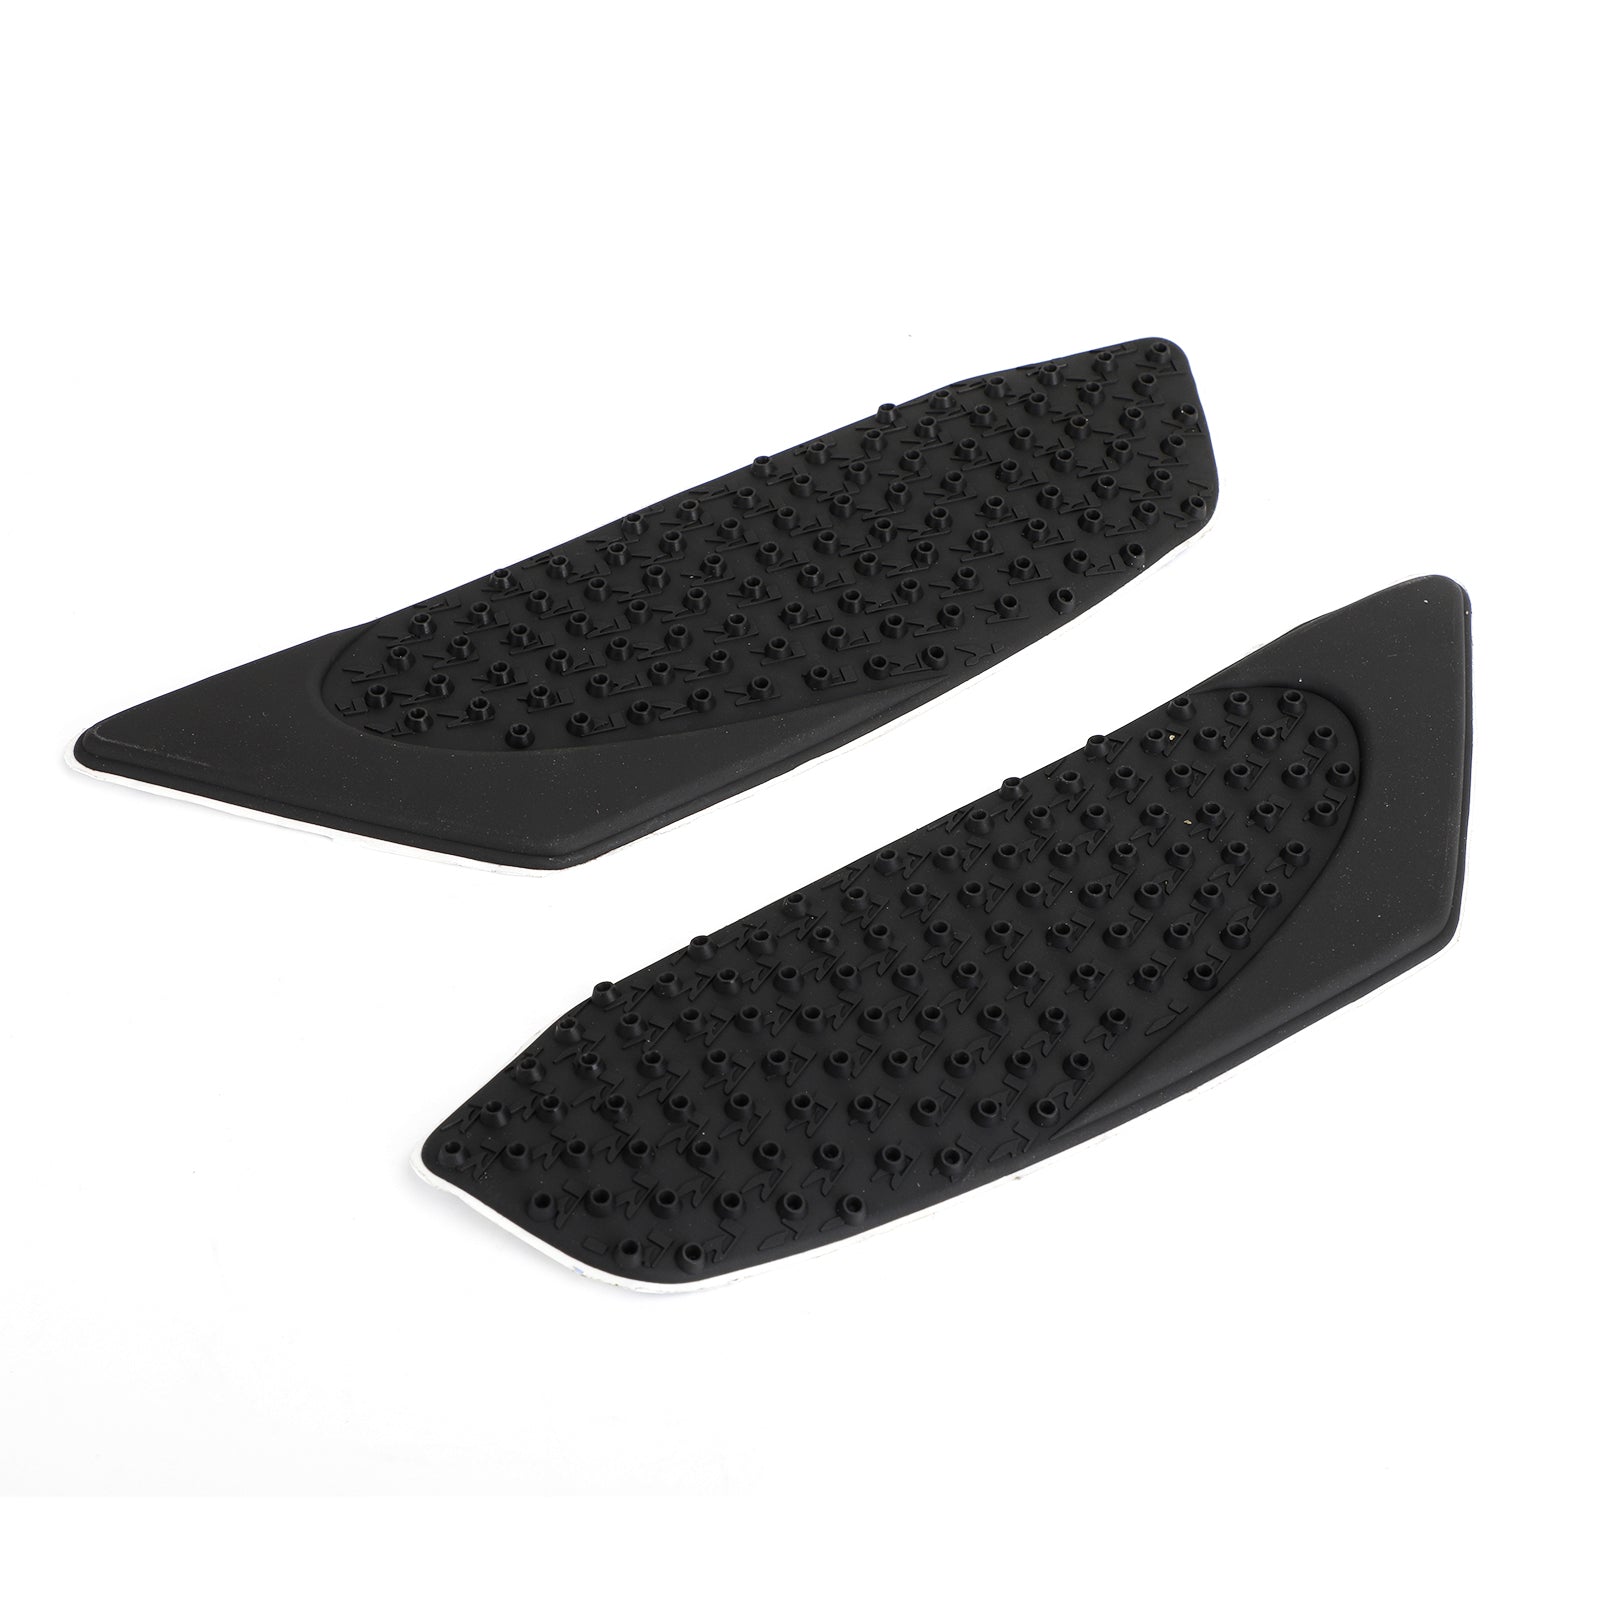 Tank Pad Traction Grip Protector 2-Piece Kit Fit for Aprilia RSV4 2010-2016